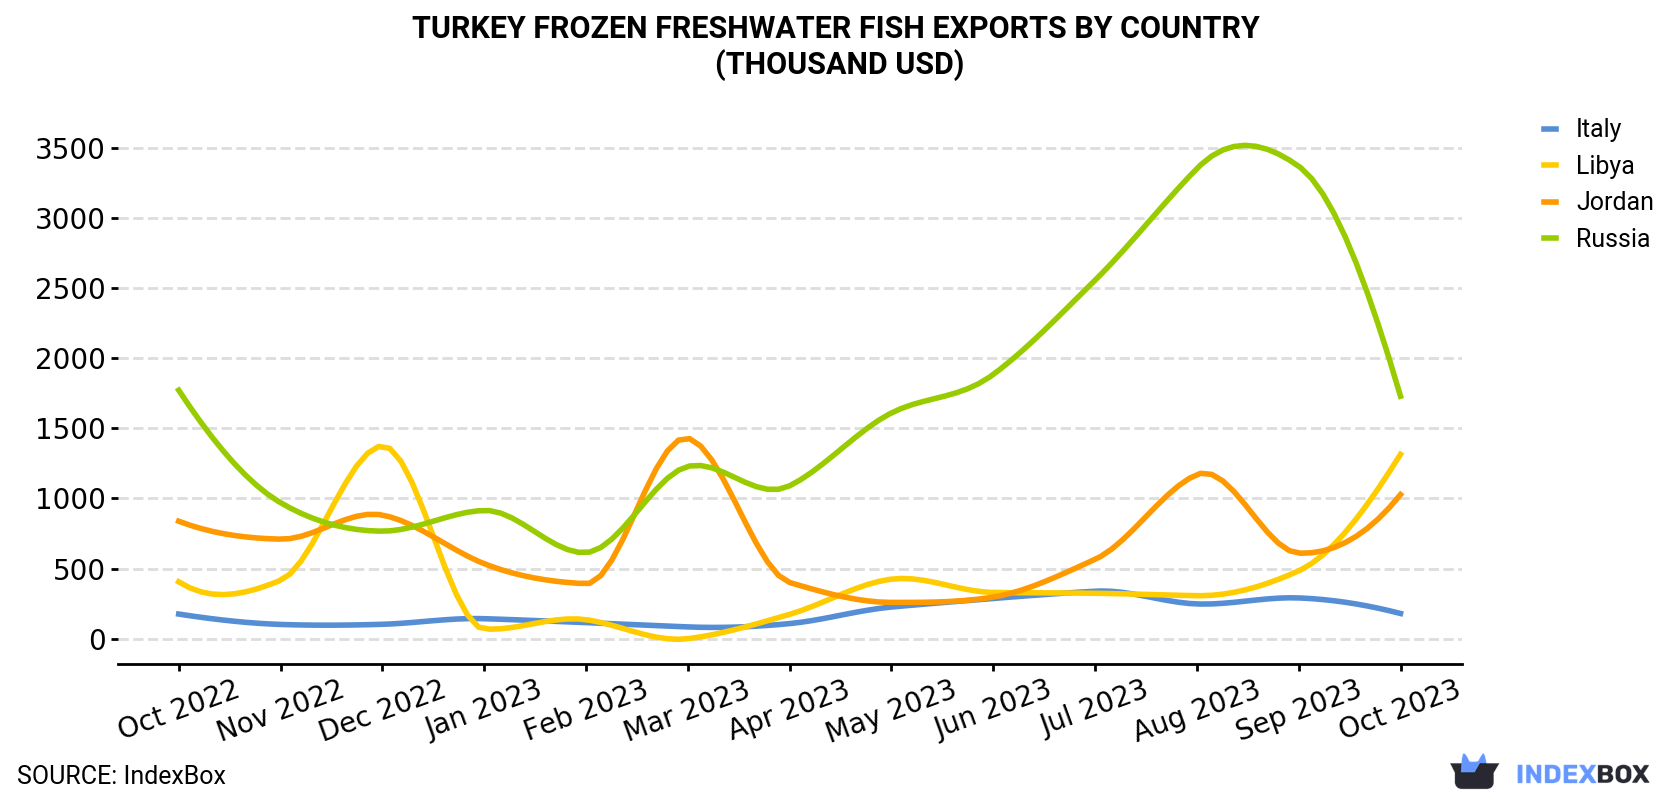 Turkey Frozen Freshwater Fish Exports By Country (Thousand USD)